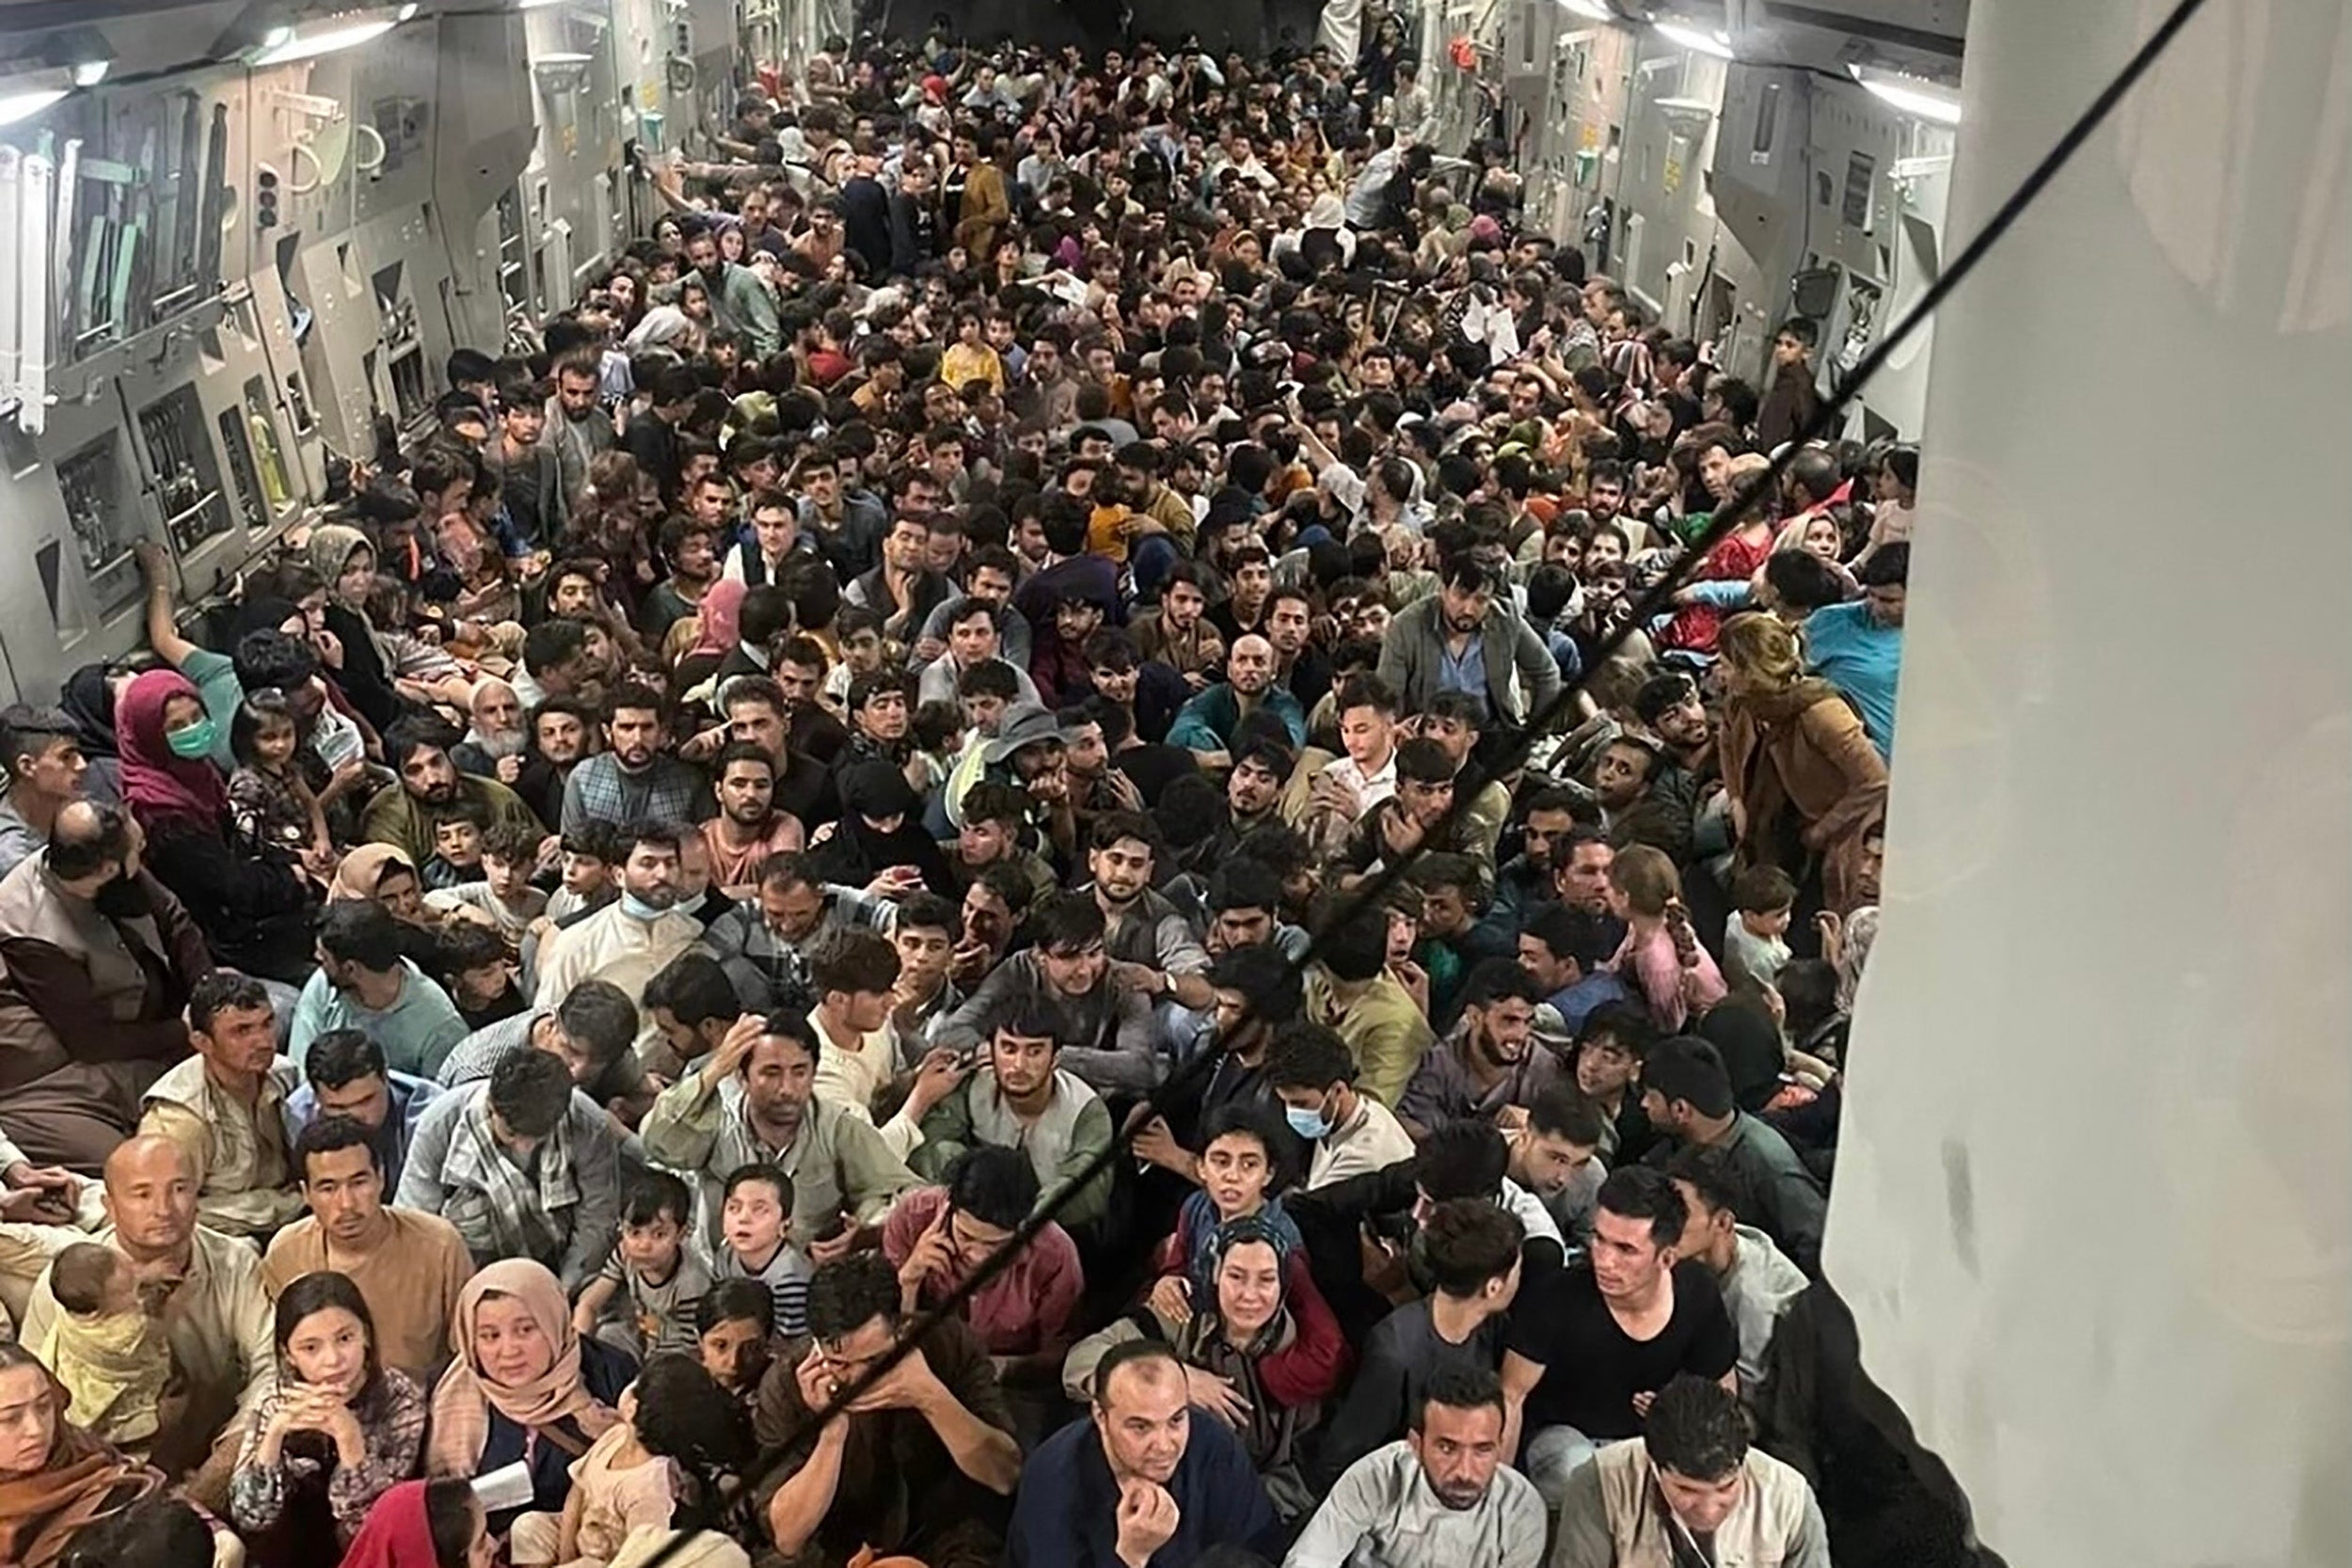 The inside of Reach 871, a U.S. Air Force C-17 Globemaster III flown from Kabul to Qatar on 15 August 15, 2021. The plane safely evacuated some 640 Afghans from Kabul late Sunday, according